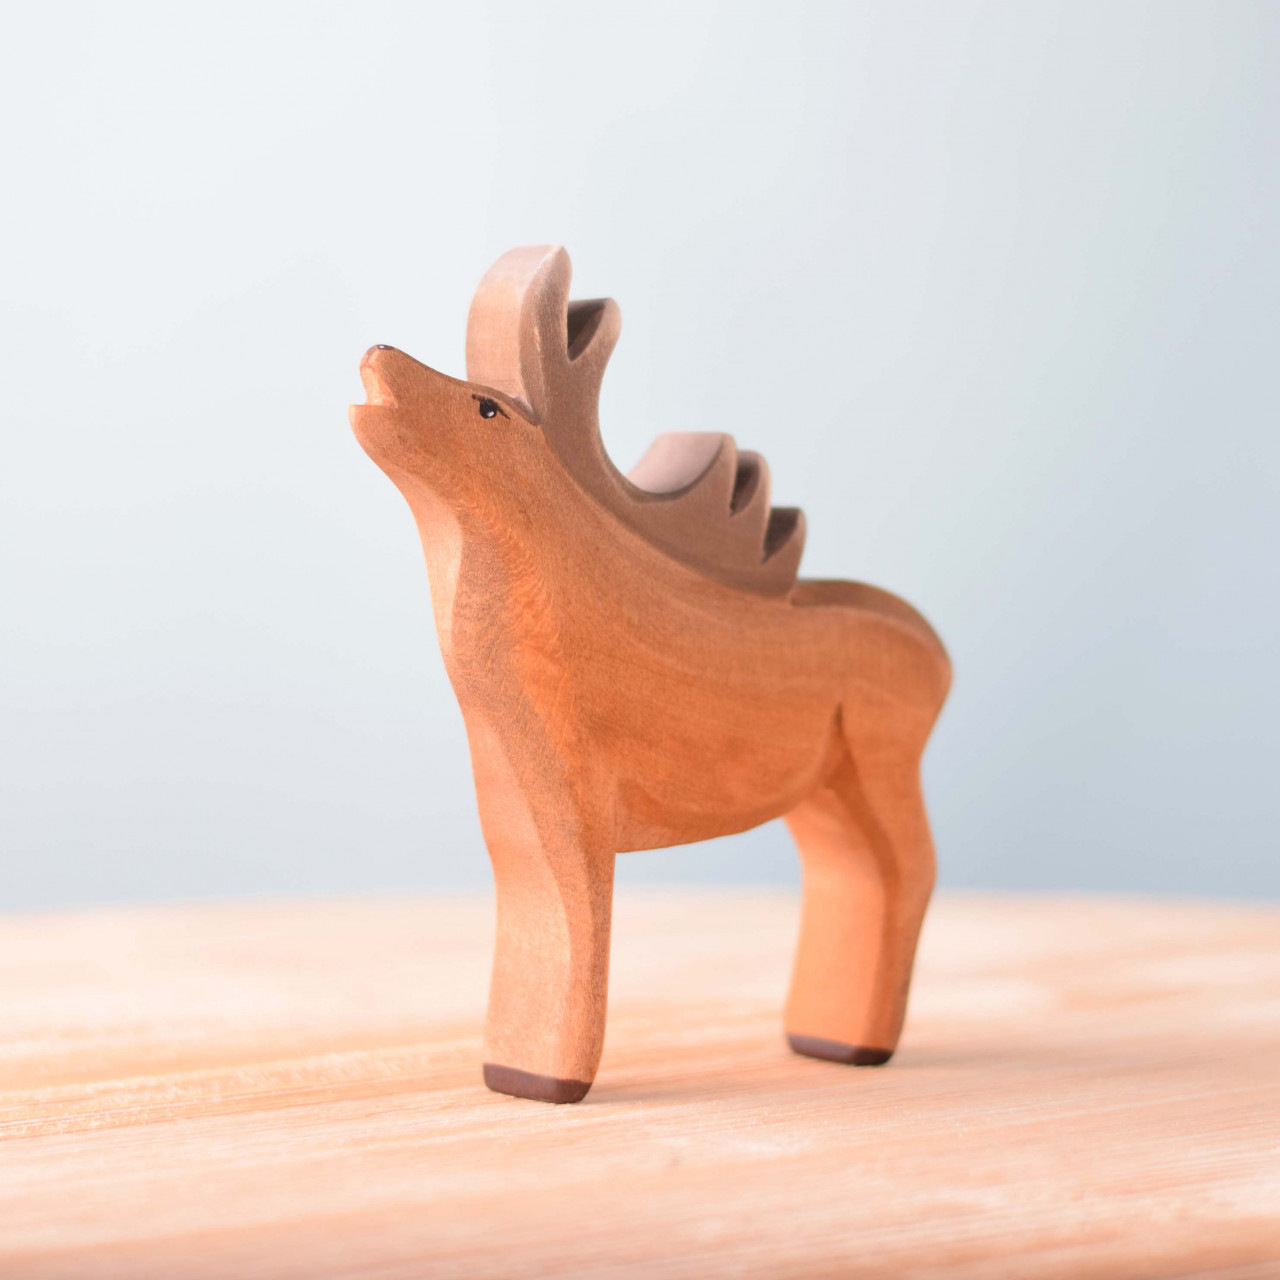 Animals of the Woods, Wooden Waldorf Toys, Ecological, Wooden Animals,  Nature Kids, Carved Animals, Eco Friendly, Animals Carved From Wood 